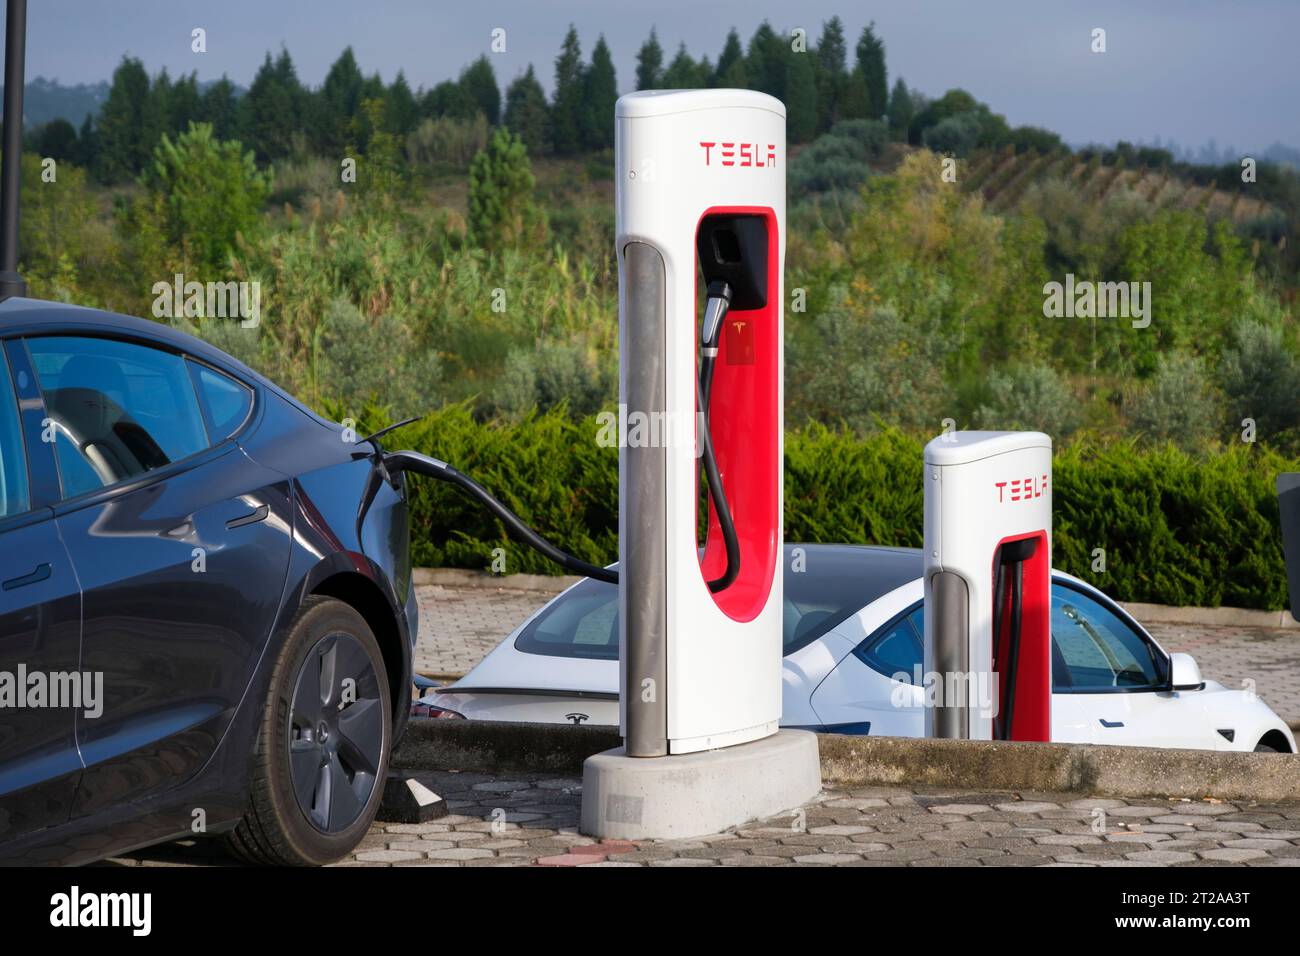 Two Tesla model 3 electric cars rapid charging at the Tesla supercharger SUC in Mealhada, Portugal, Europe Stock Photo